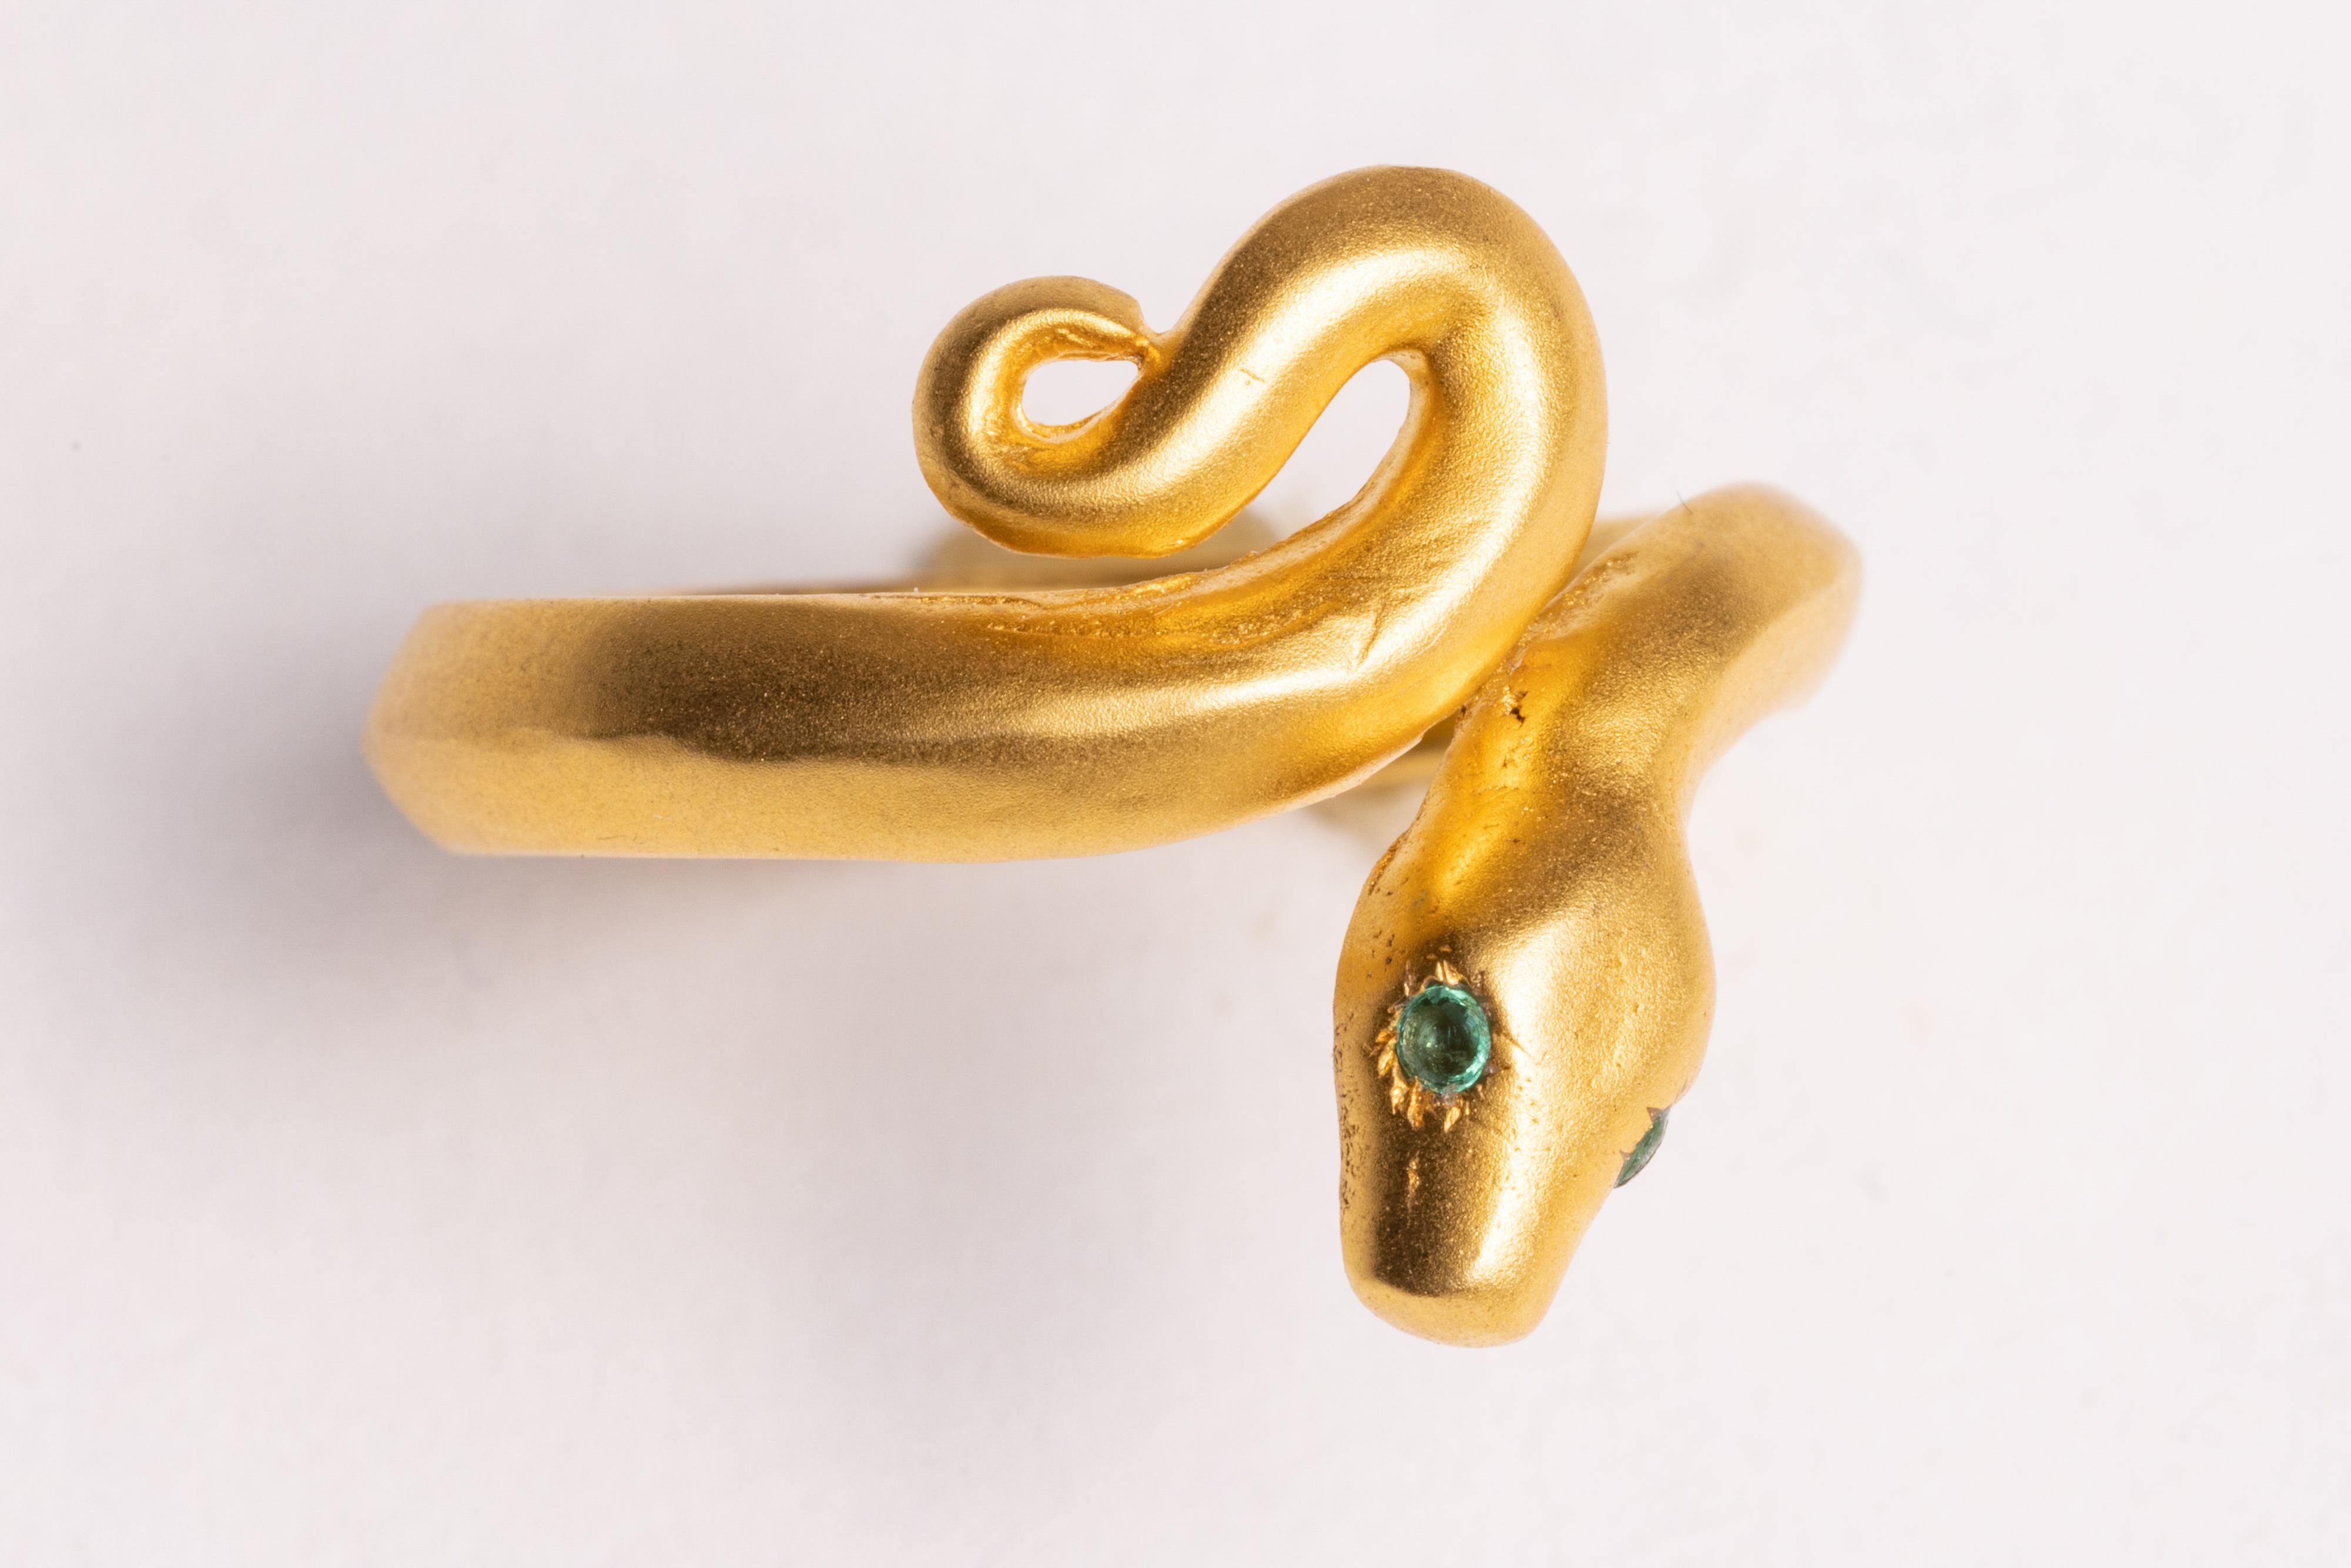 An appealing 22K gold matte finish, hand-crafted snake band ring.  It has round, faceted emerald eyes.  Size is 8.25.

The fine jewelry collection is sourced, designed or created by Deborah Lockhart Phillips. Through her international travels, she